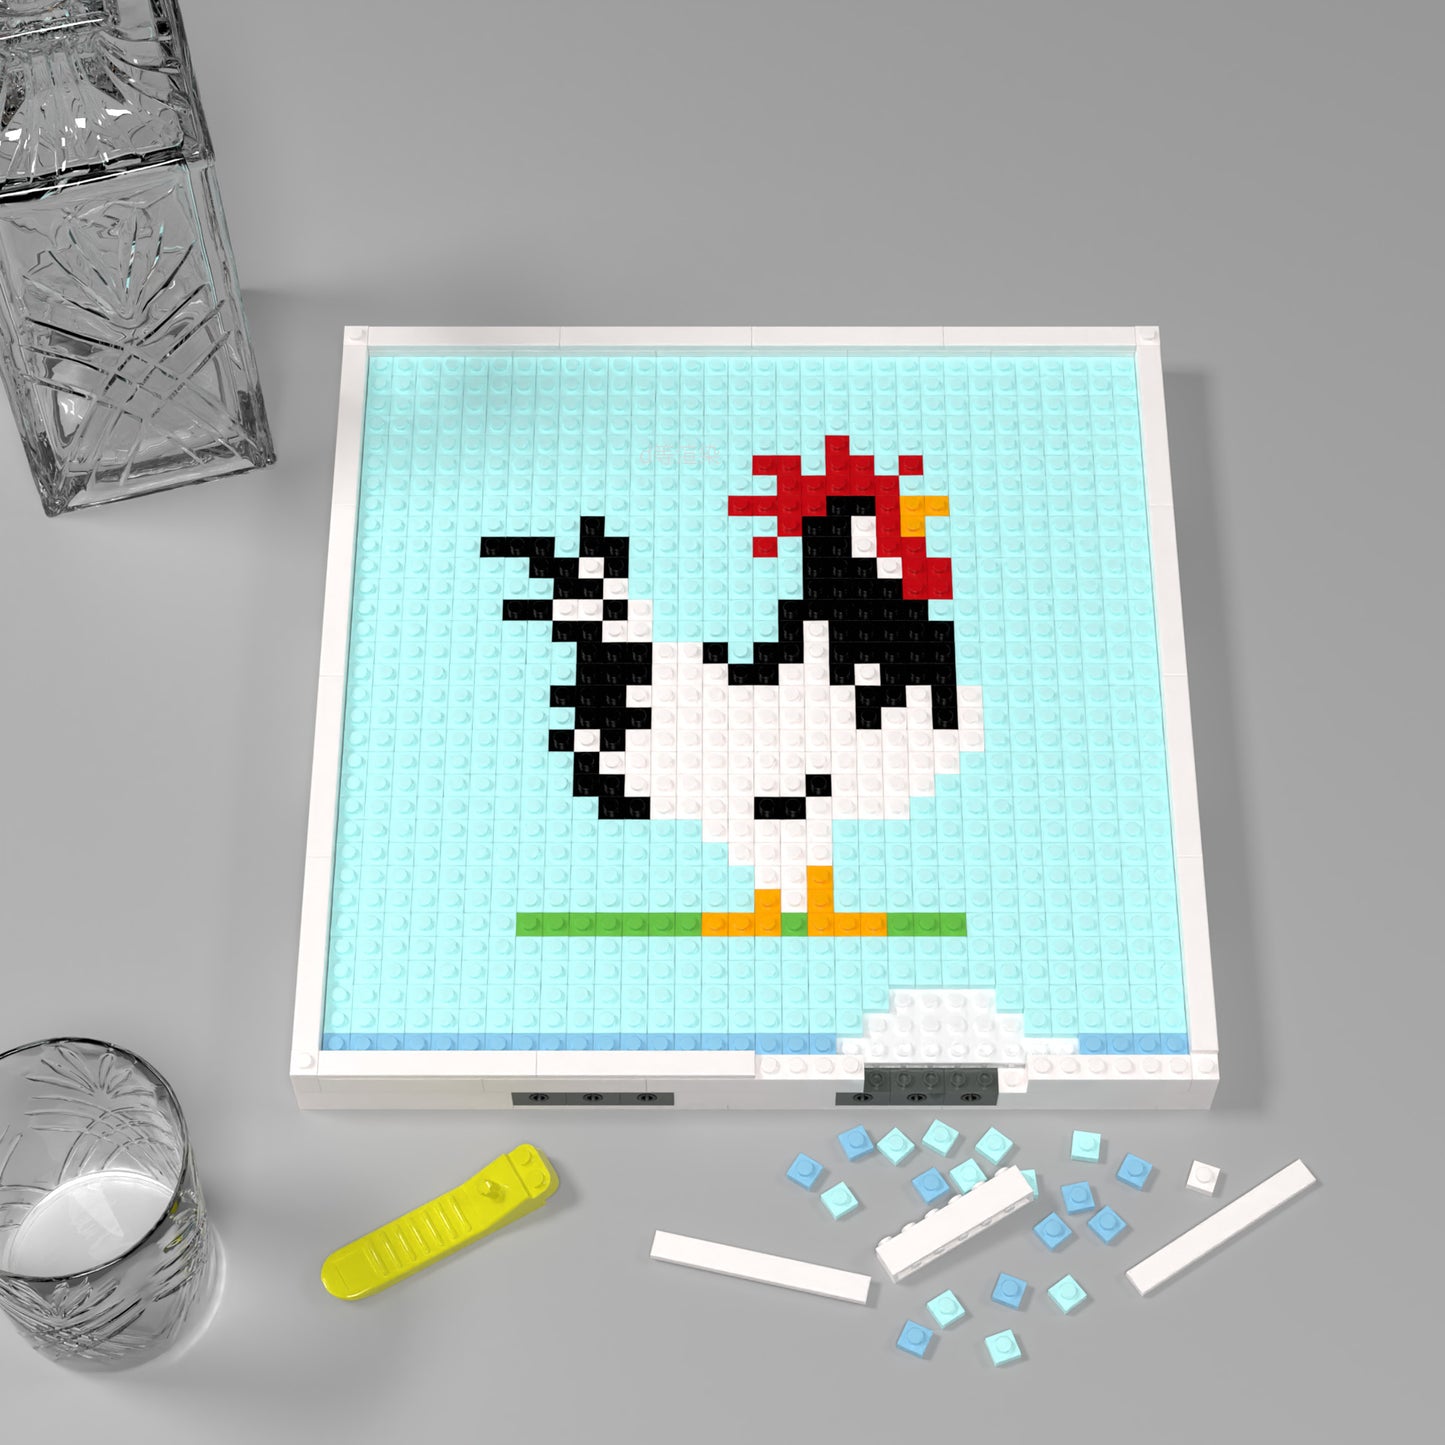 Crowing Rooster - A Pixel Art Made of 32*32 Compatible Lego Bricks